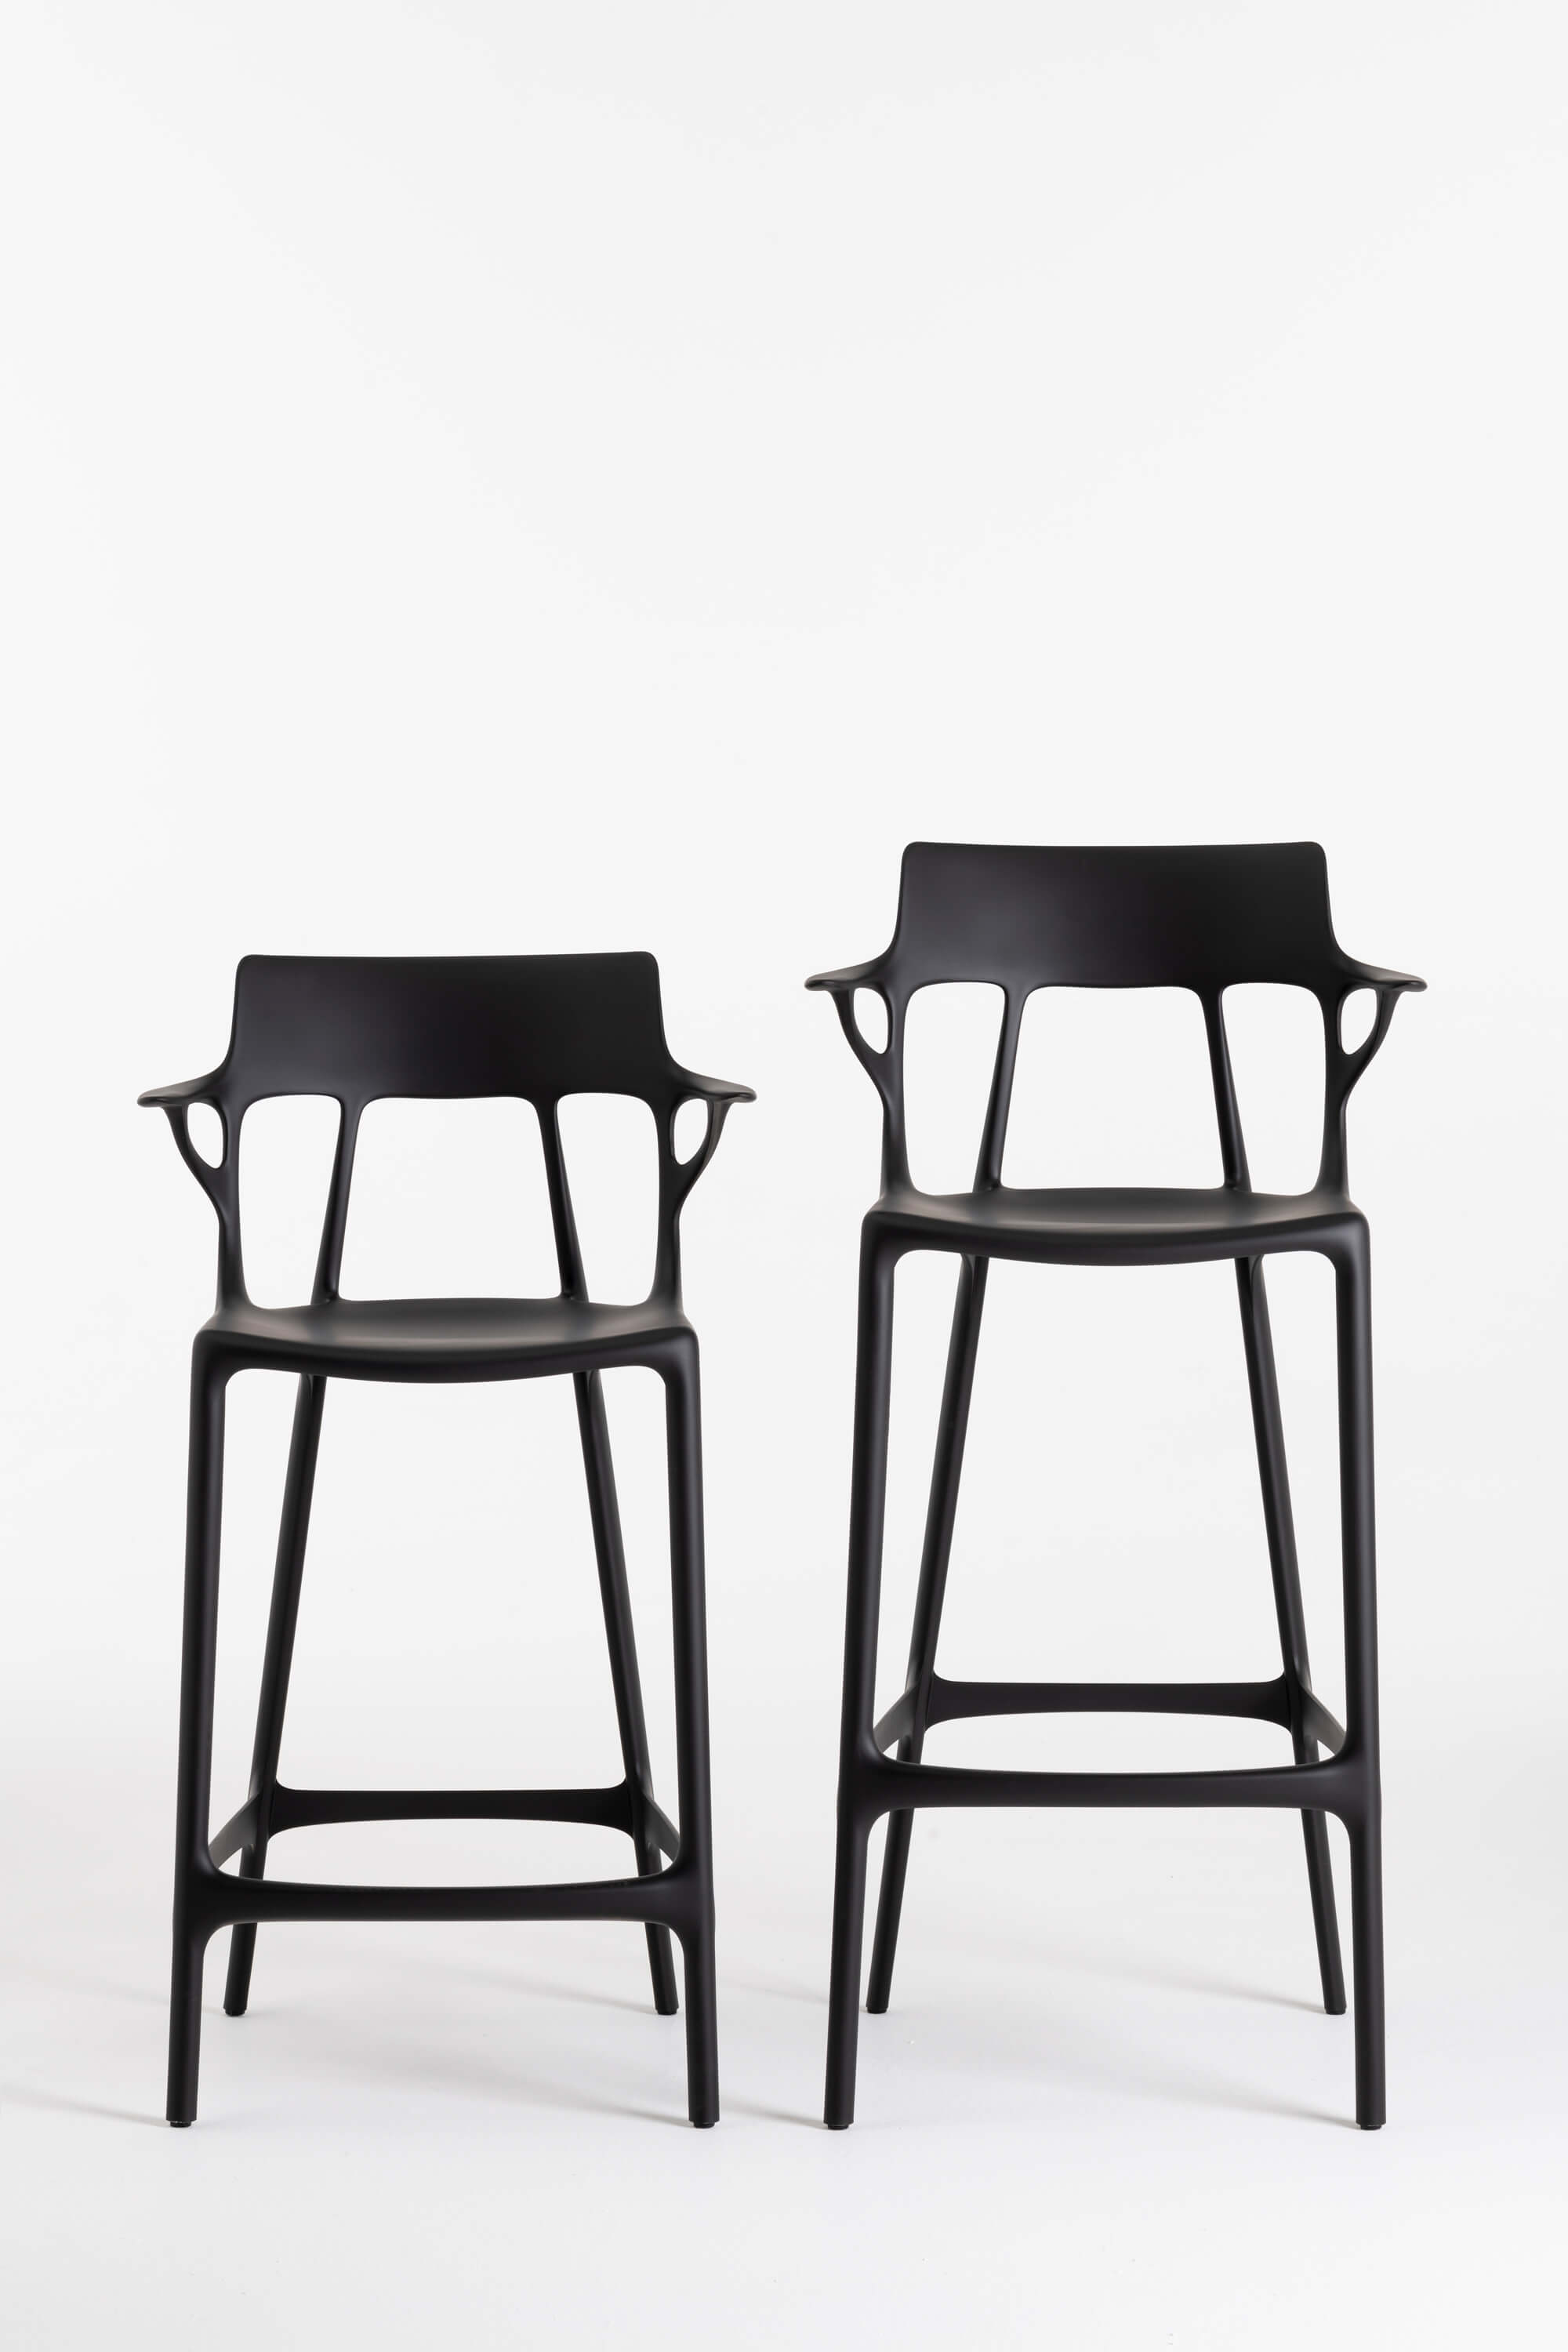 A.I STOOL RECYCLED (KARTELL)